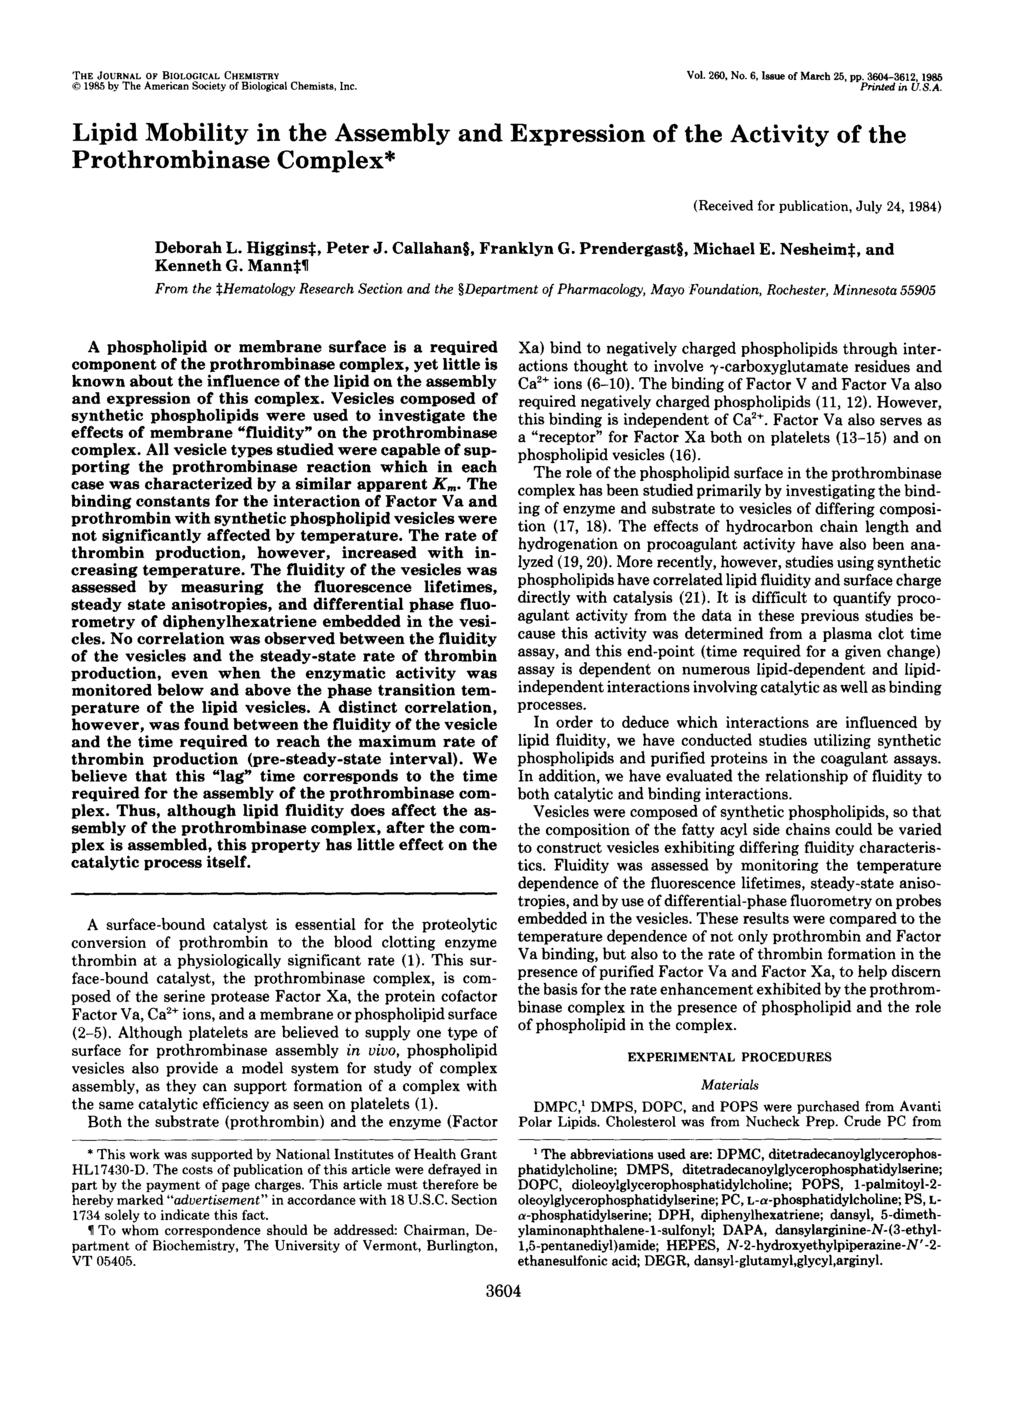 THE JOURNAL OF BIOLOGICAL CHEMISTRY 0 1985 by The American Society of Biological Chemists, Inc. Vol. 260, No. 6, lasue of March 25, PP. 3604-3612,1985 Printed in U. S. A. Lipid Mobility in the Assembly and Expression of the Activity of the Prothrombinase Complex* (Received for publication, July 24, 1984) Deborah L.